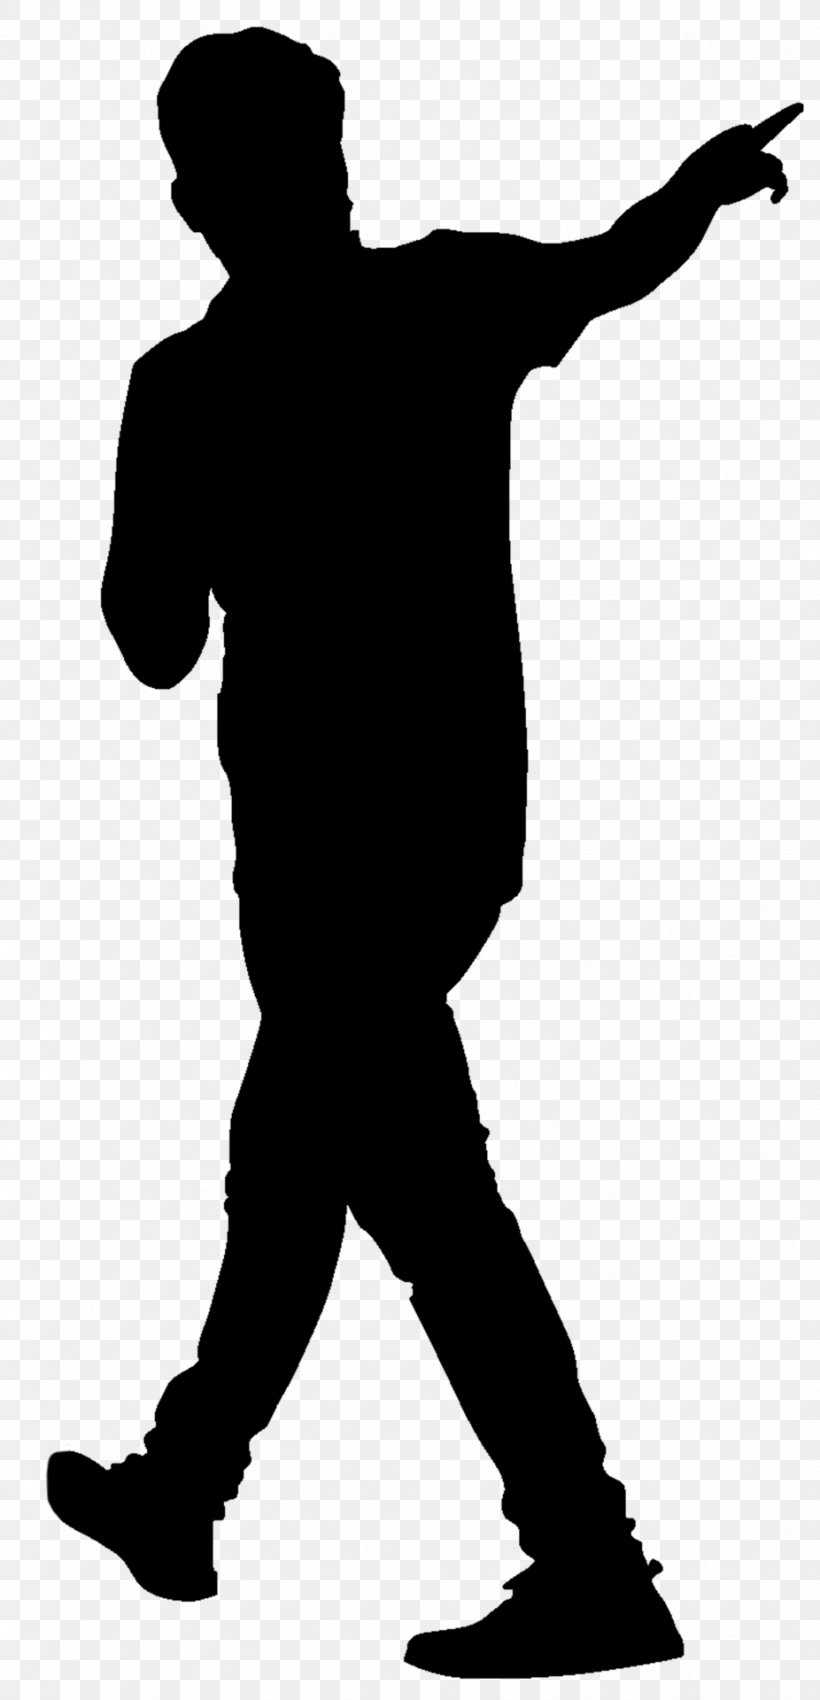 Silhouette Soldier Illustration Vector Graphics Clip Art, PNG, 926x1920px, Silhouette, Black, Cartoon, Military, Shadow Download Free